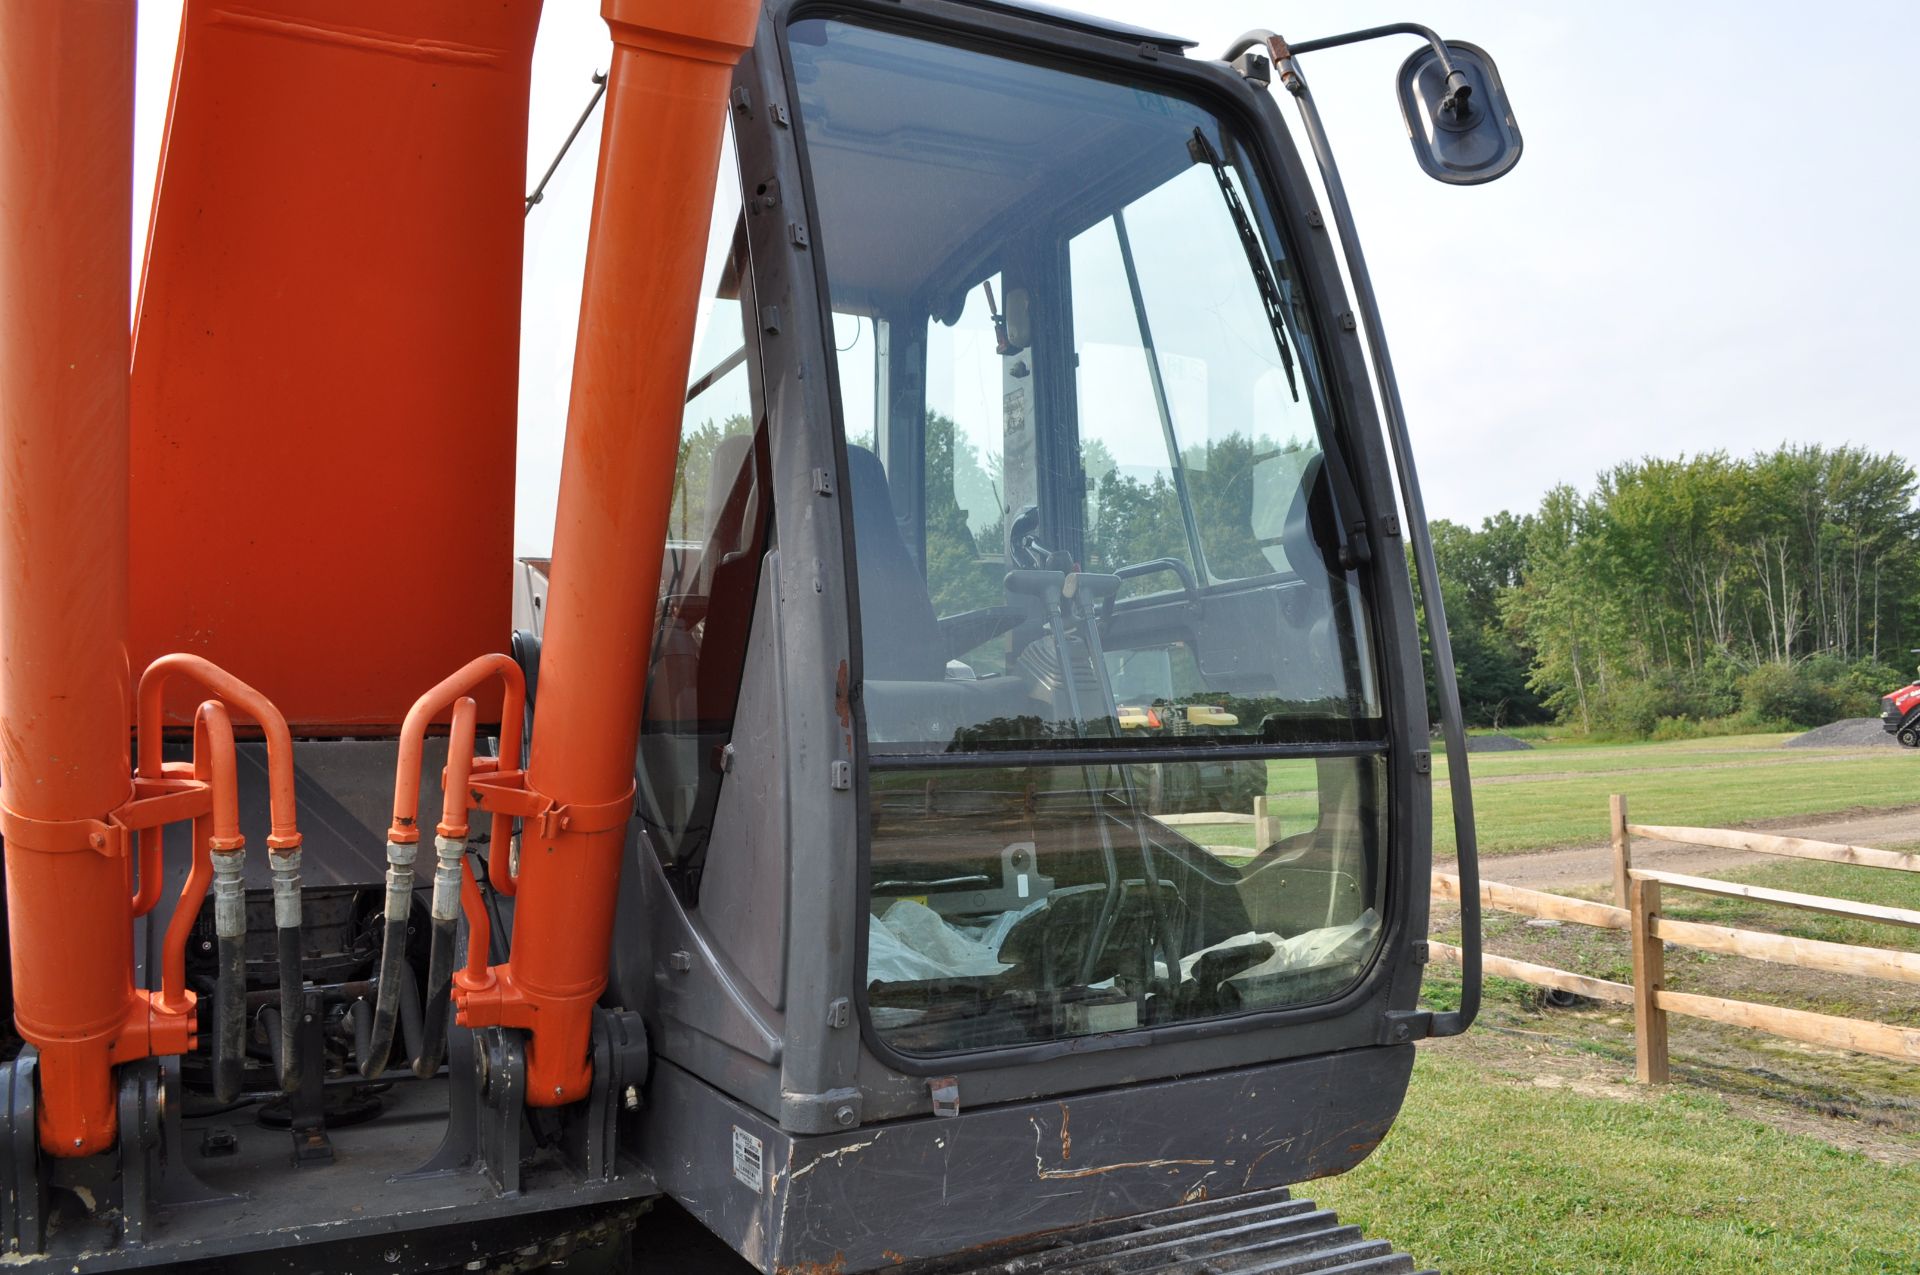 Hitachi ZX 200 LC-3 excavator, 32” steel pads, C/H/A, 72” smooth bucket, hyd coupler, aux boom hyd - Image 19 of 34